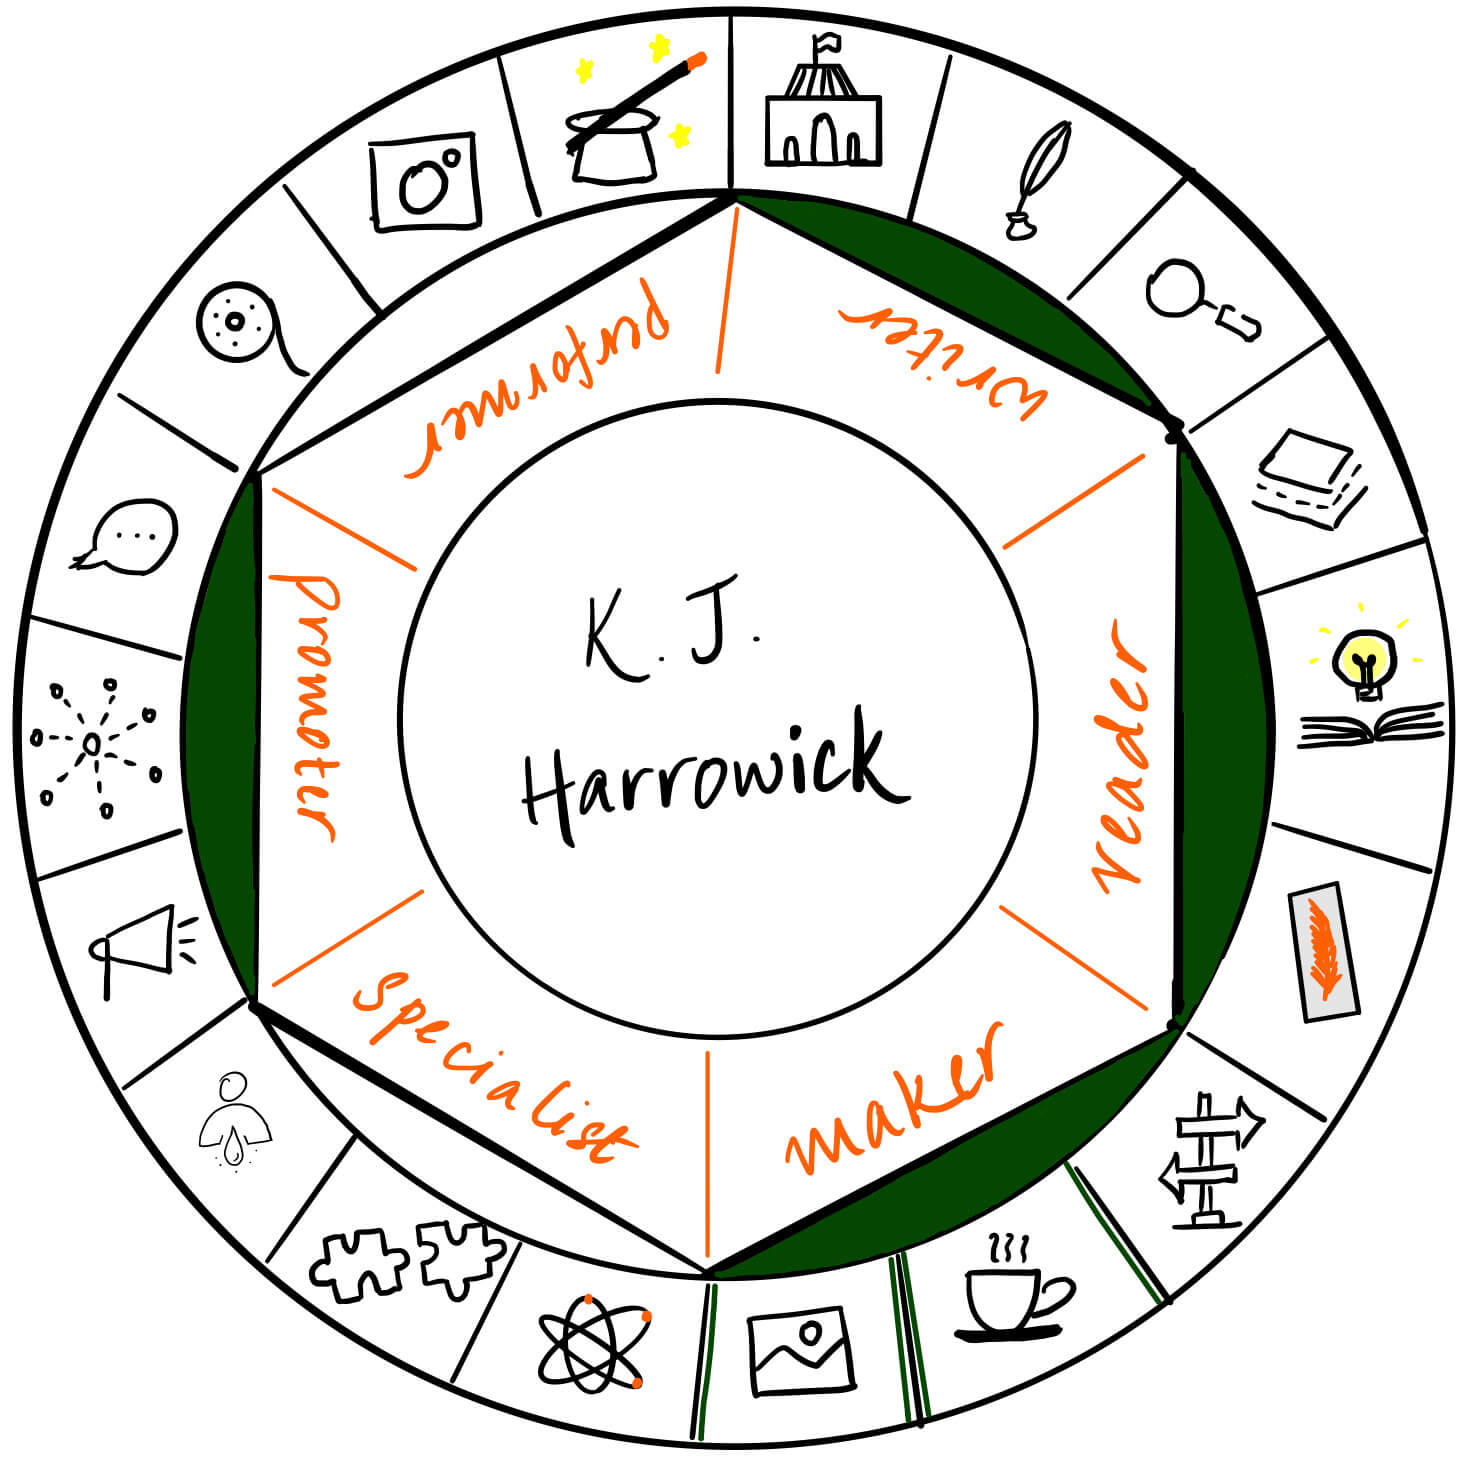 K.J. Harrowick's creator's roulette graphic. She is active in many writing communtities and it's a pleasure to talk to her about them on Creator's Roulette today